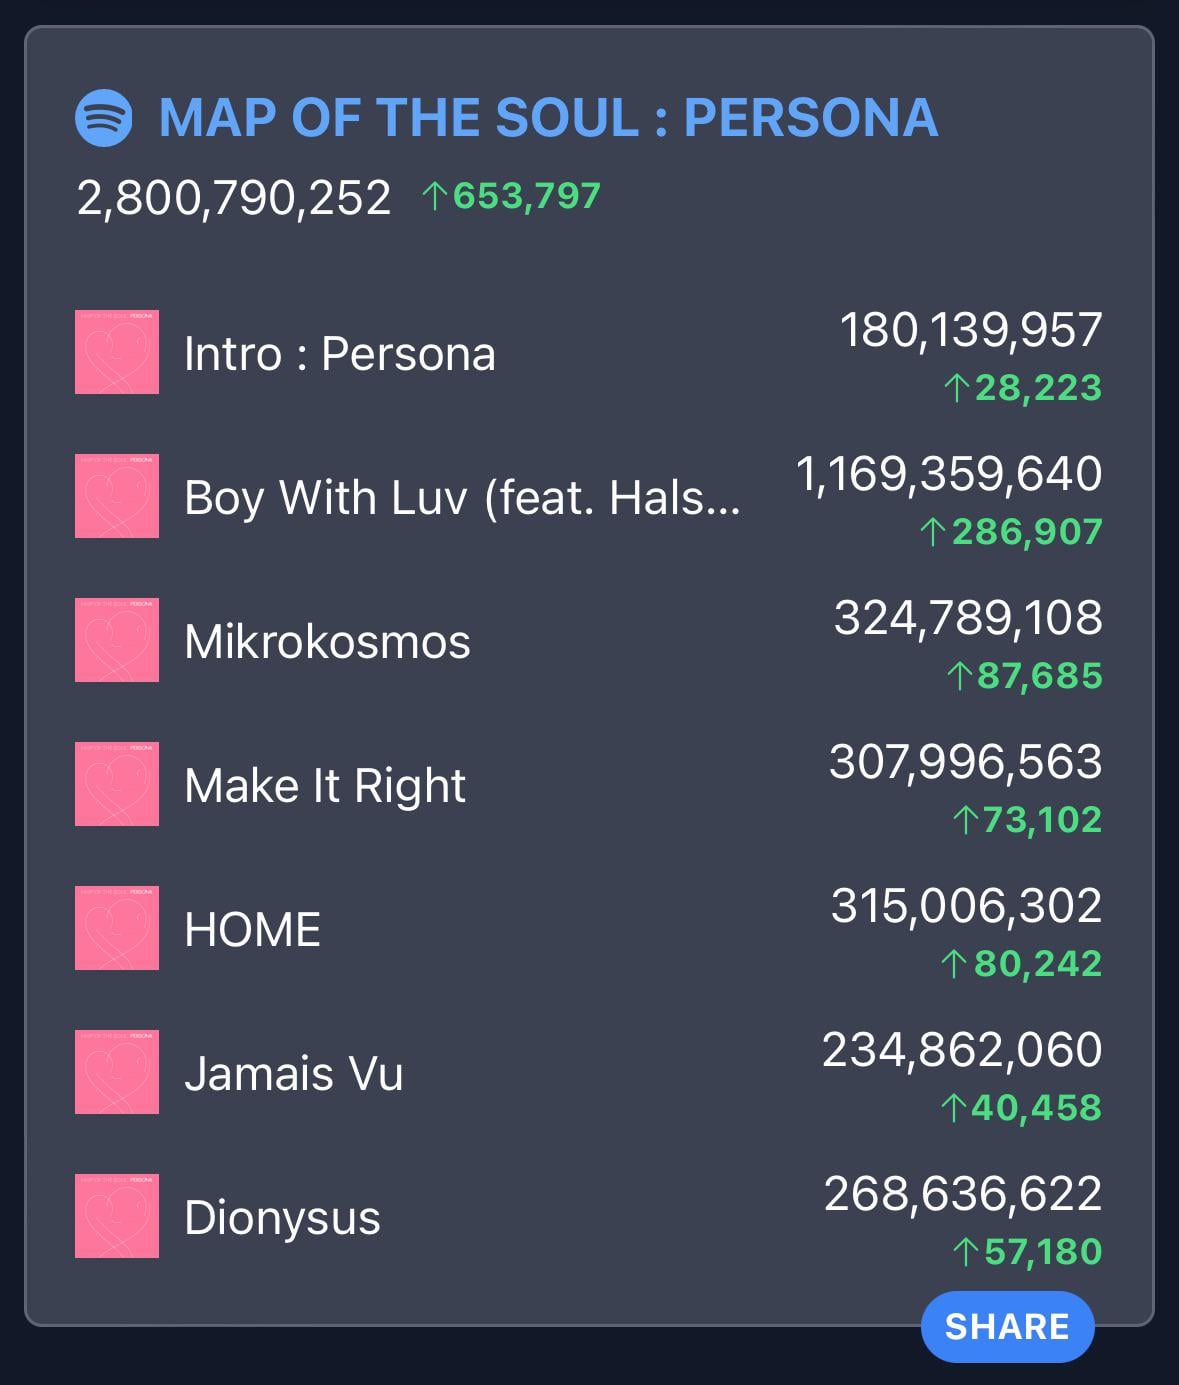 BTS’ “MAP OF THE SOUL : PERSONA” has surpassed 2.8 billion streams on Spotify! - 260624